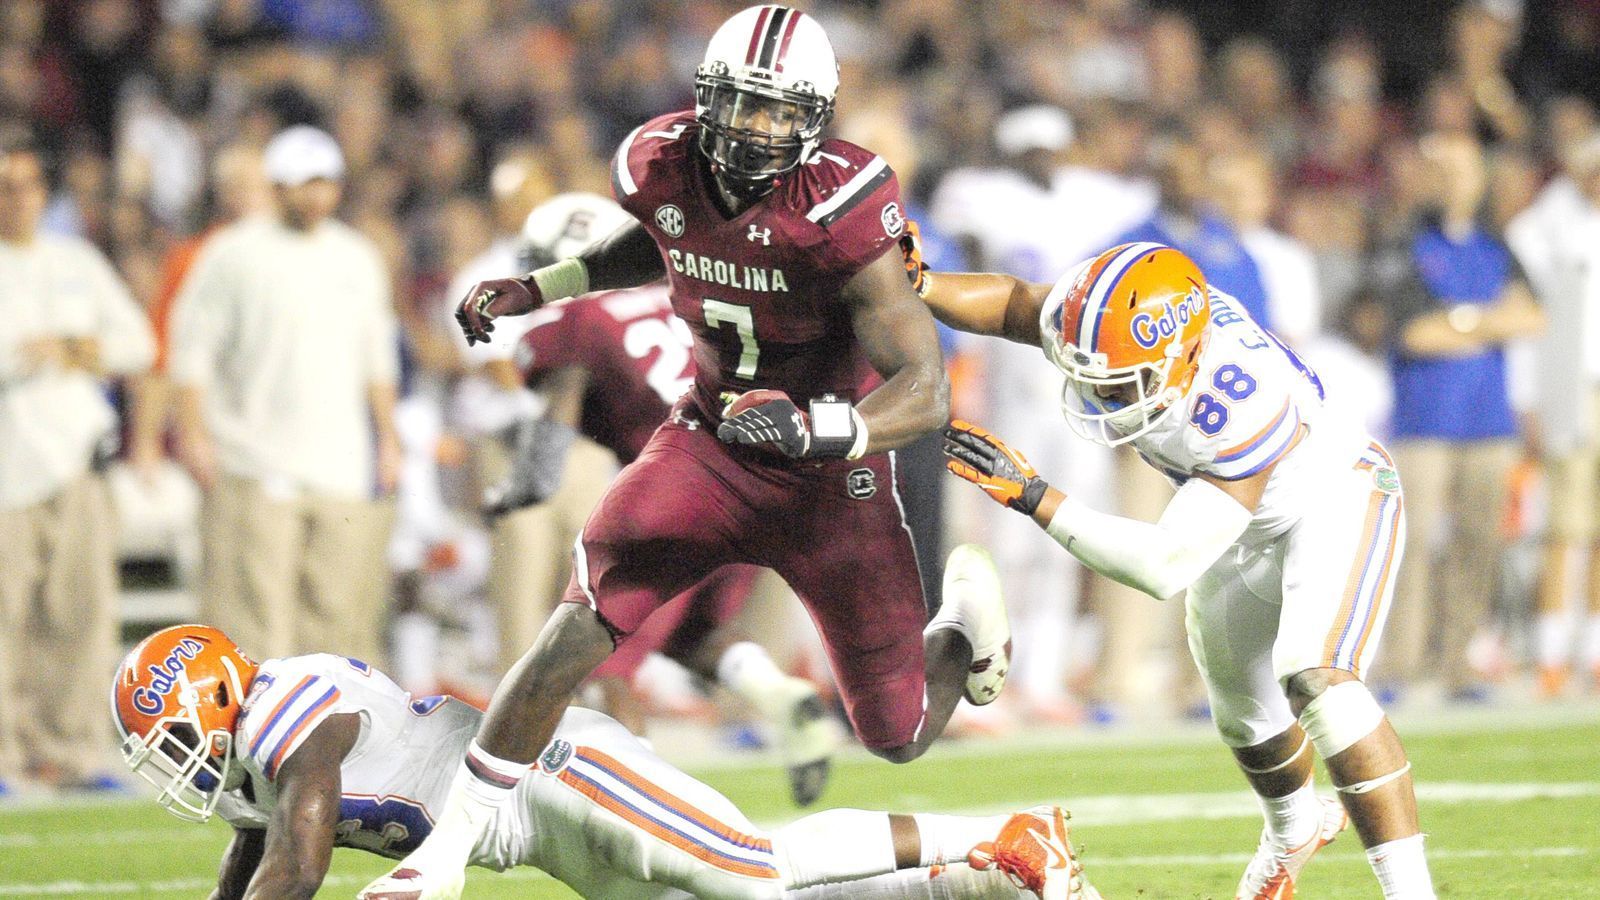 
                <strong>Jadeveon Clowney (Seattle Seahawks)</strong><br>
                College: South Carolina GamecocksPosition am College: Defensive Lineman / Defensive EndJahre am College: 3College-Stats: 129 Total Tackles - 24 Sacks - 9 Forced FumblesGedrafted: 2014 an 1. Stelle von den Houston Texans
              